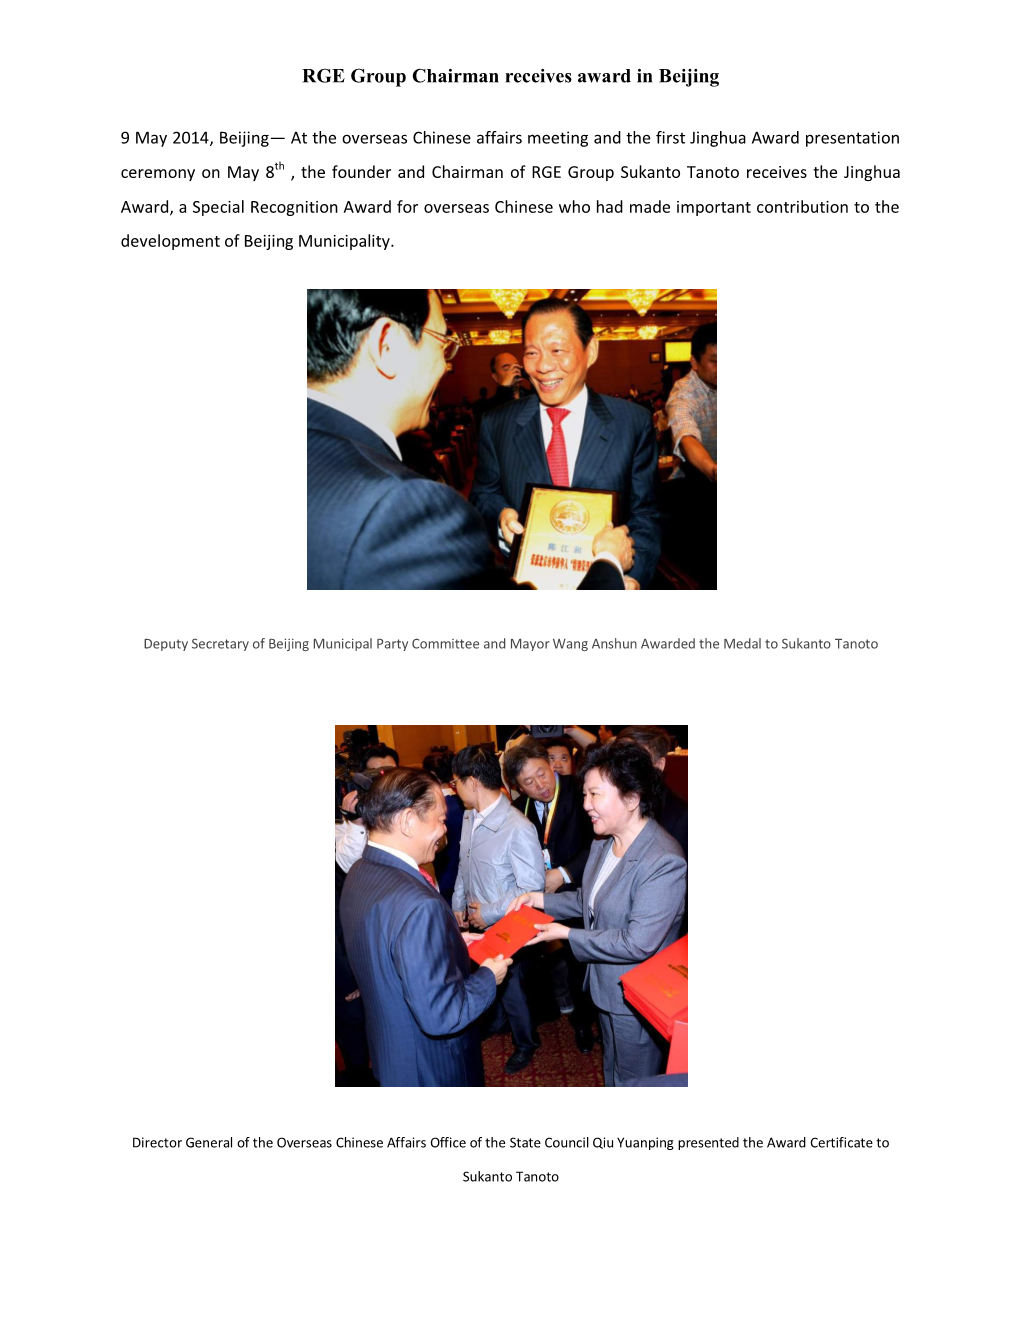 RGE Group Chairman Receives Award in Beijing